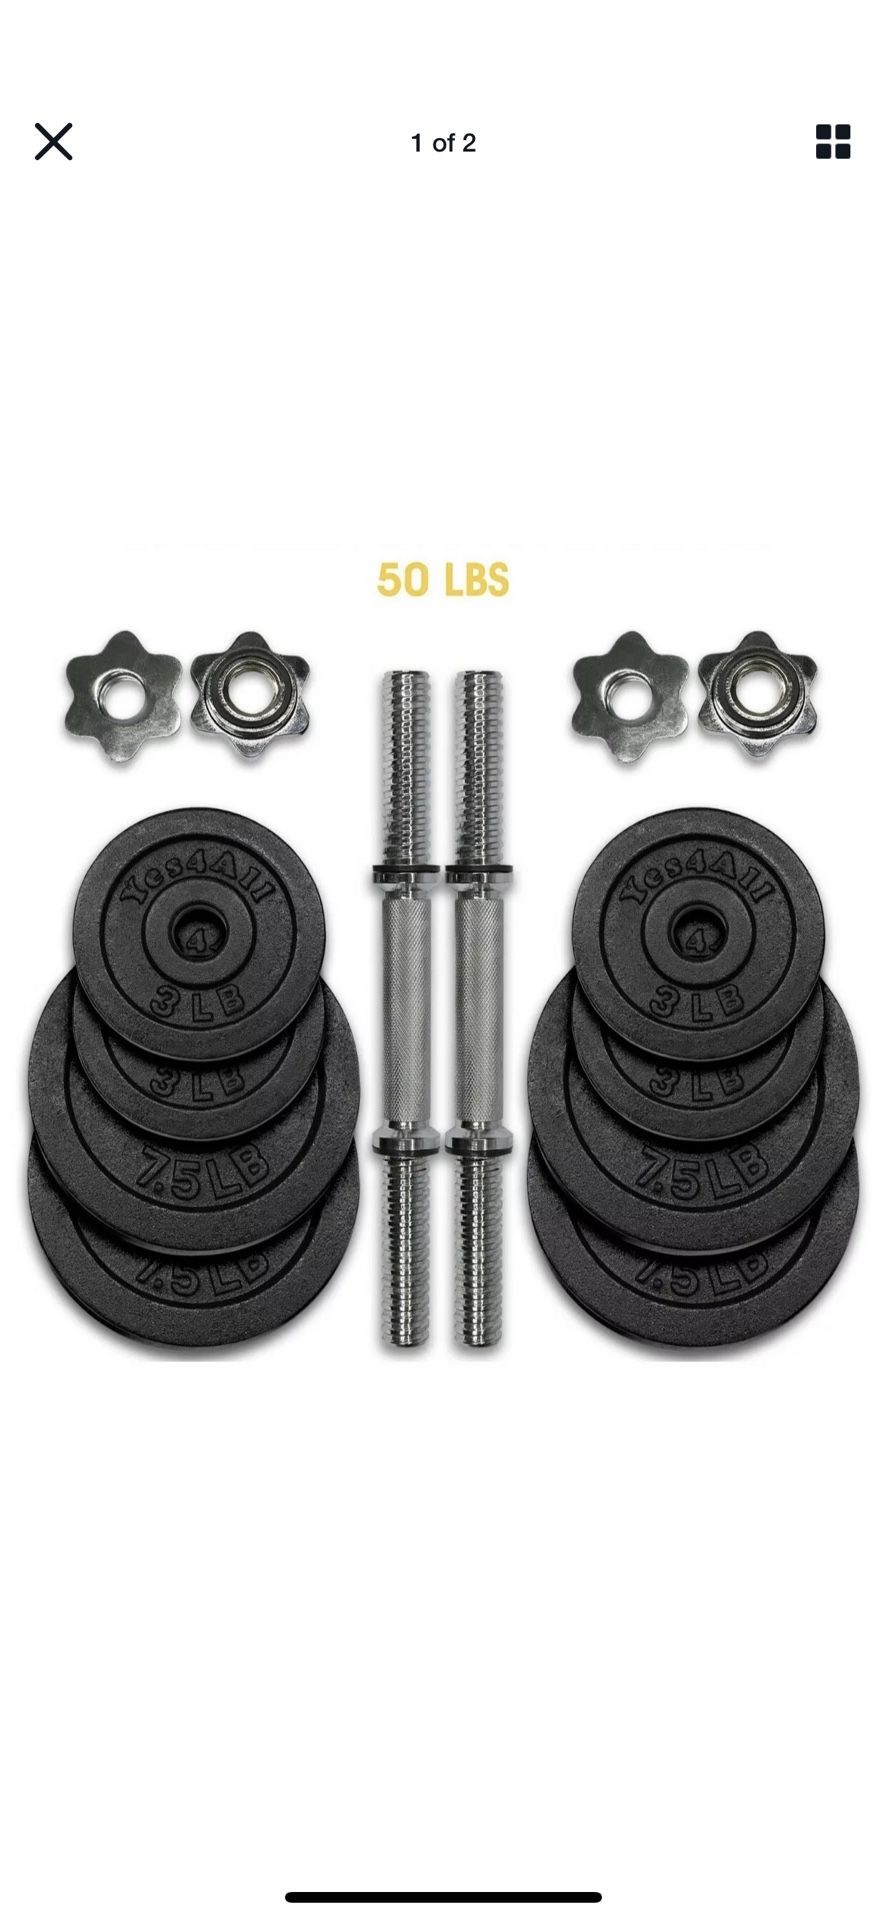 Yes 4 all adjustable dumbbell total weights 50 lbs (25lbs x 2)